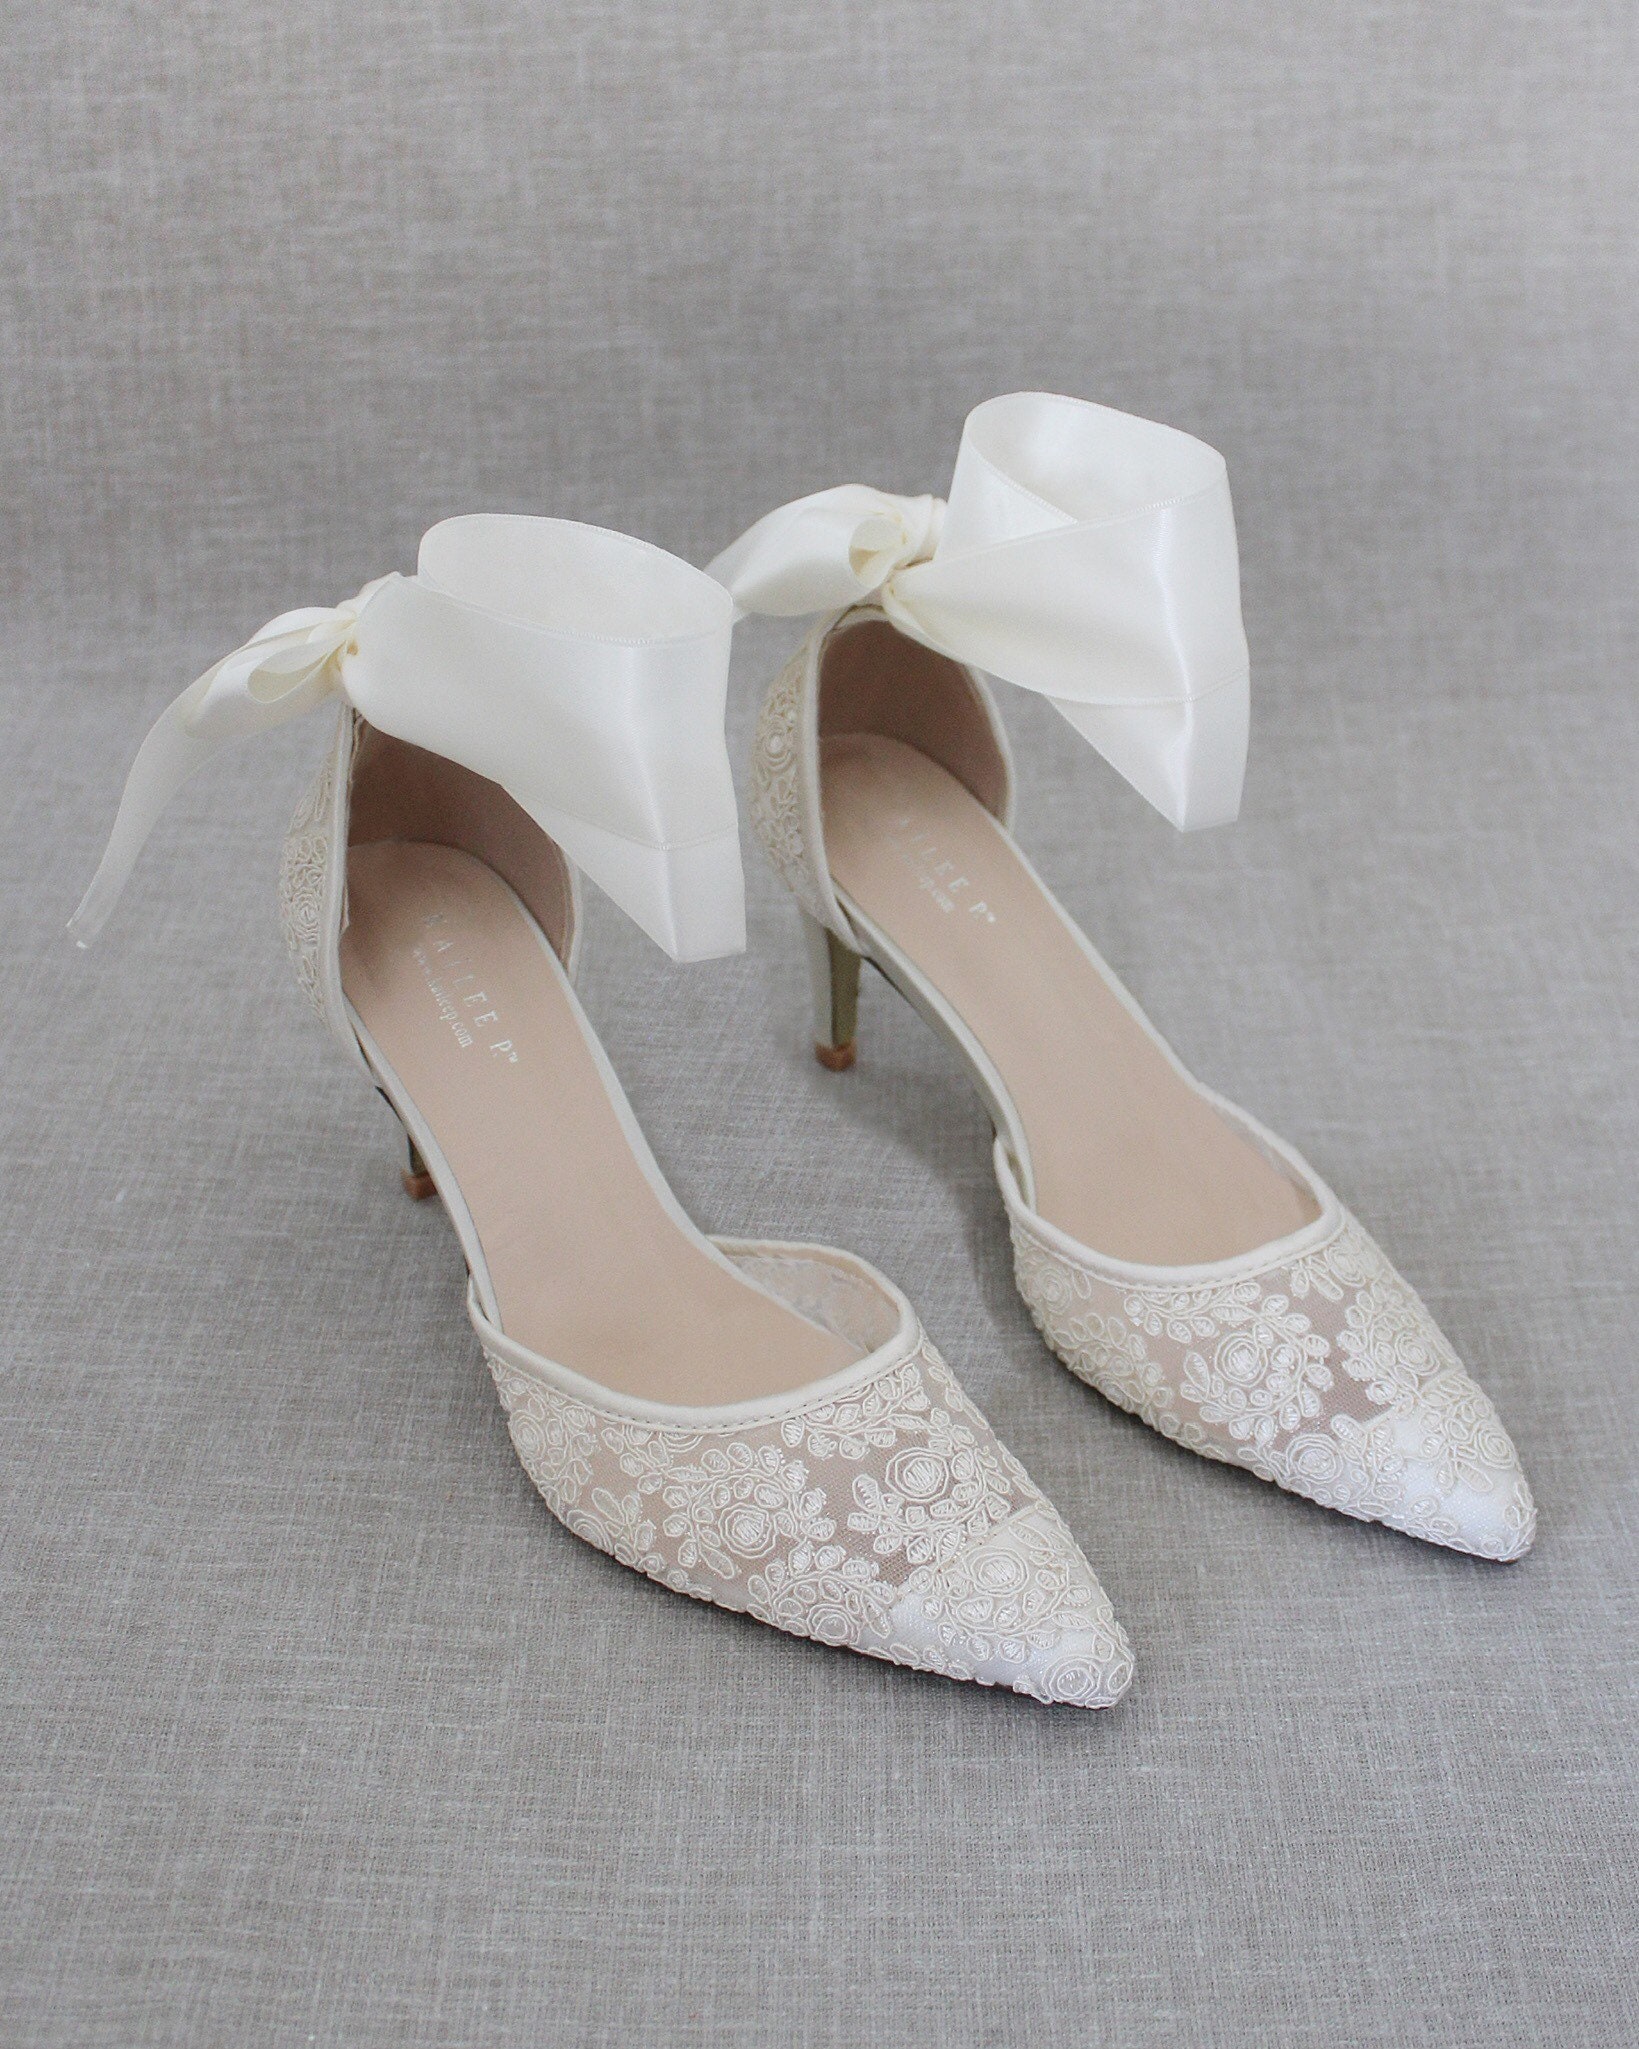 Ivory Crochet Lace Pointy Toe Heels With WRAPPED SATIN TIE - Etsy